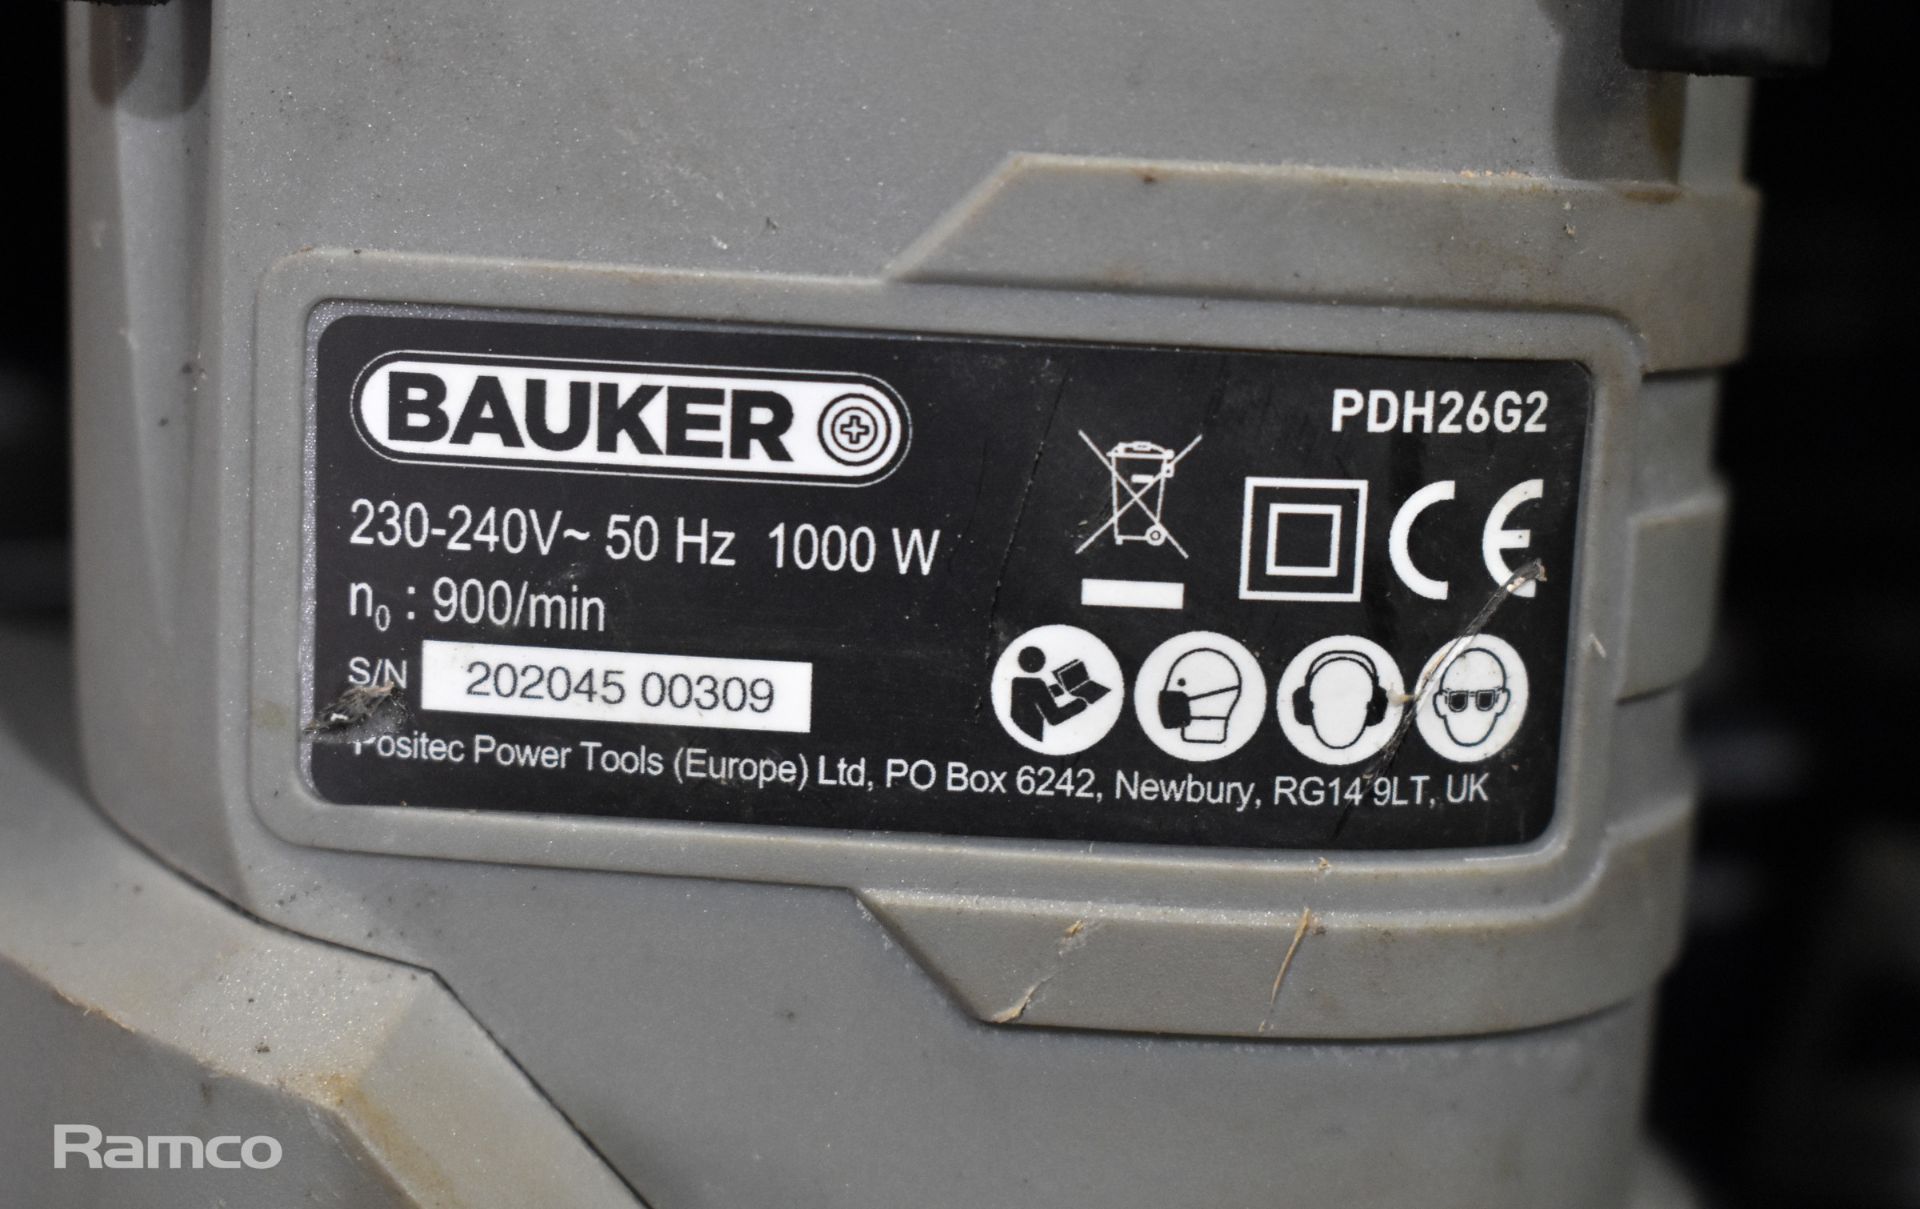 2x Bauker 1000 W hammer drills with case - Image 8 of 10